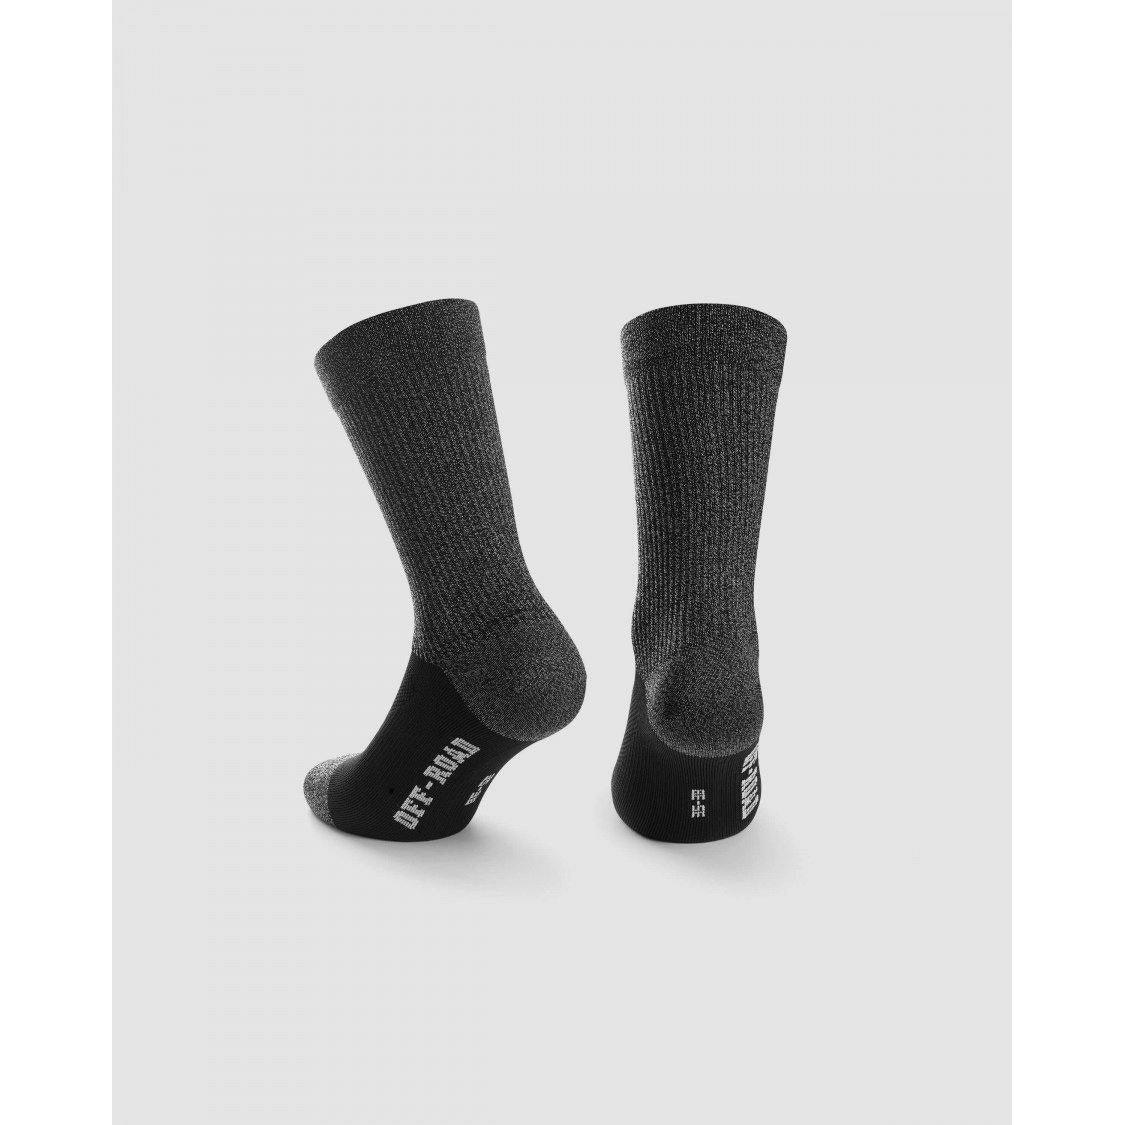 Assos of Switzerland Trail Socks | Strictly Bicycles 